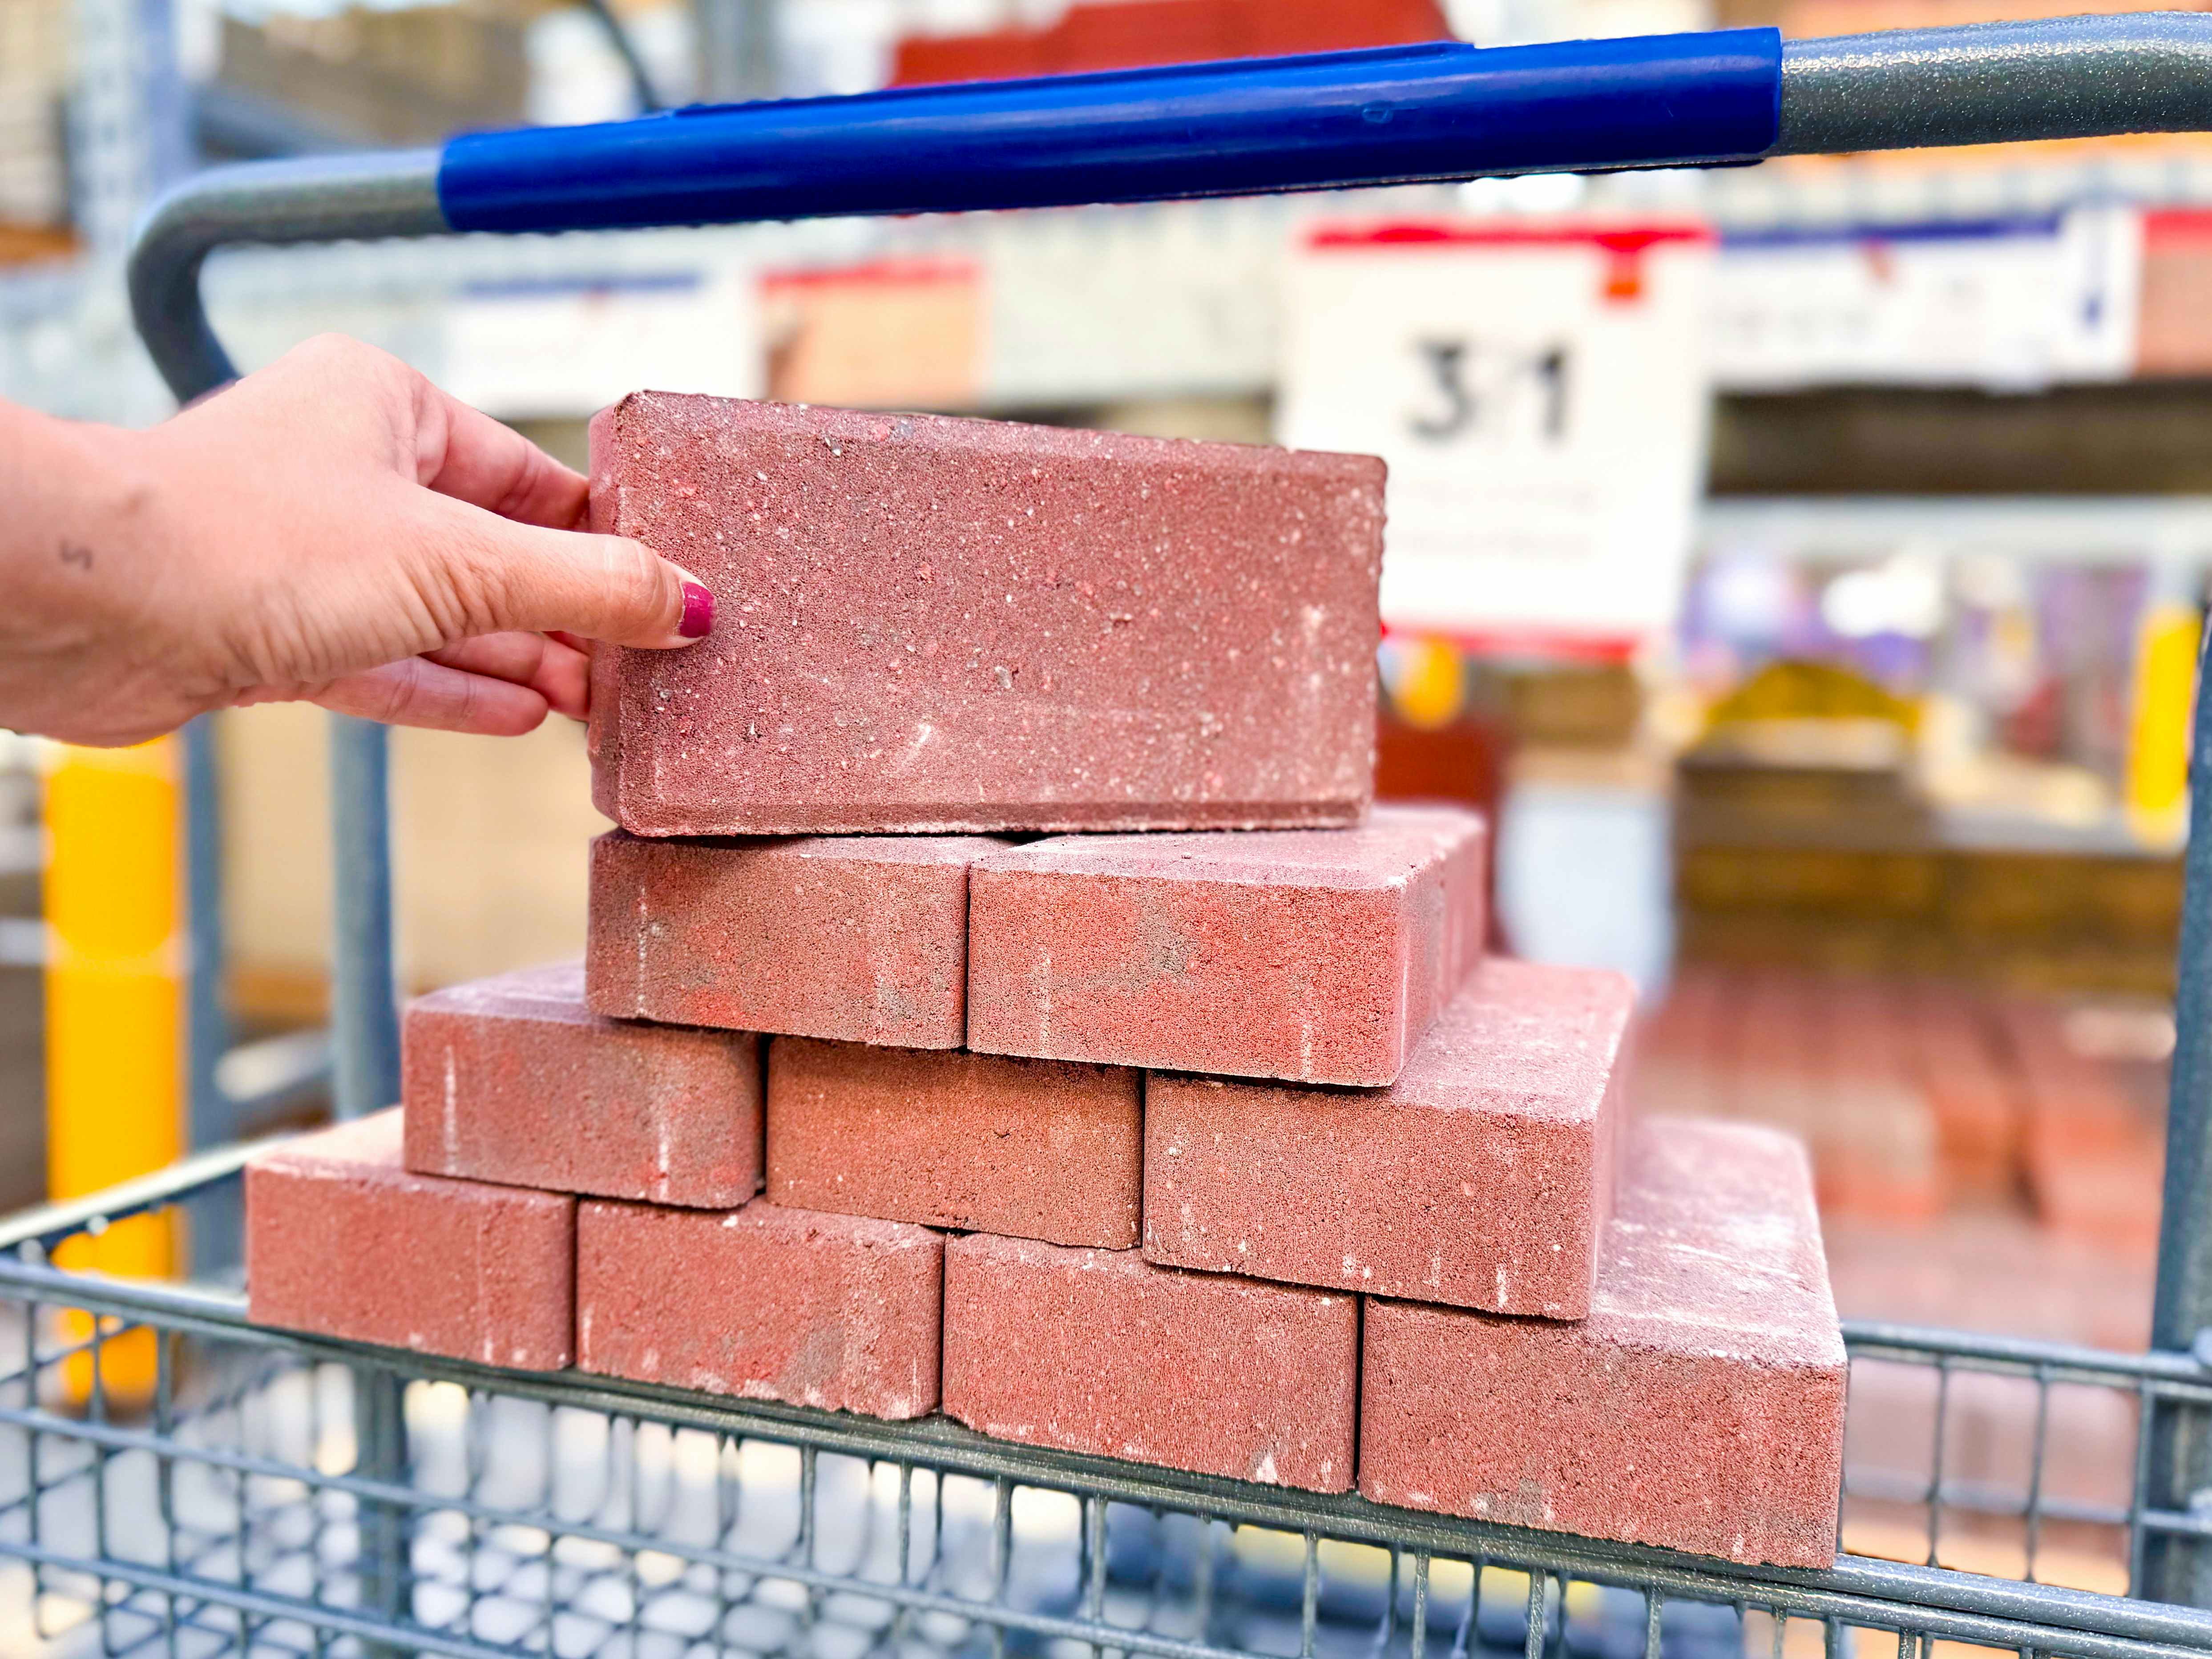 Lowe's Has Concrete Pavers for Just $0.33 Each